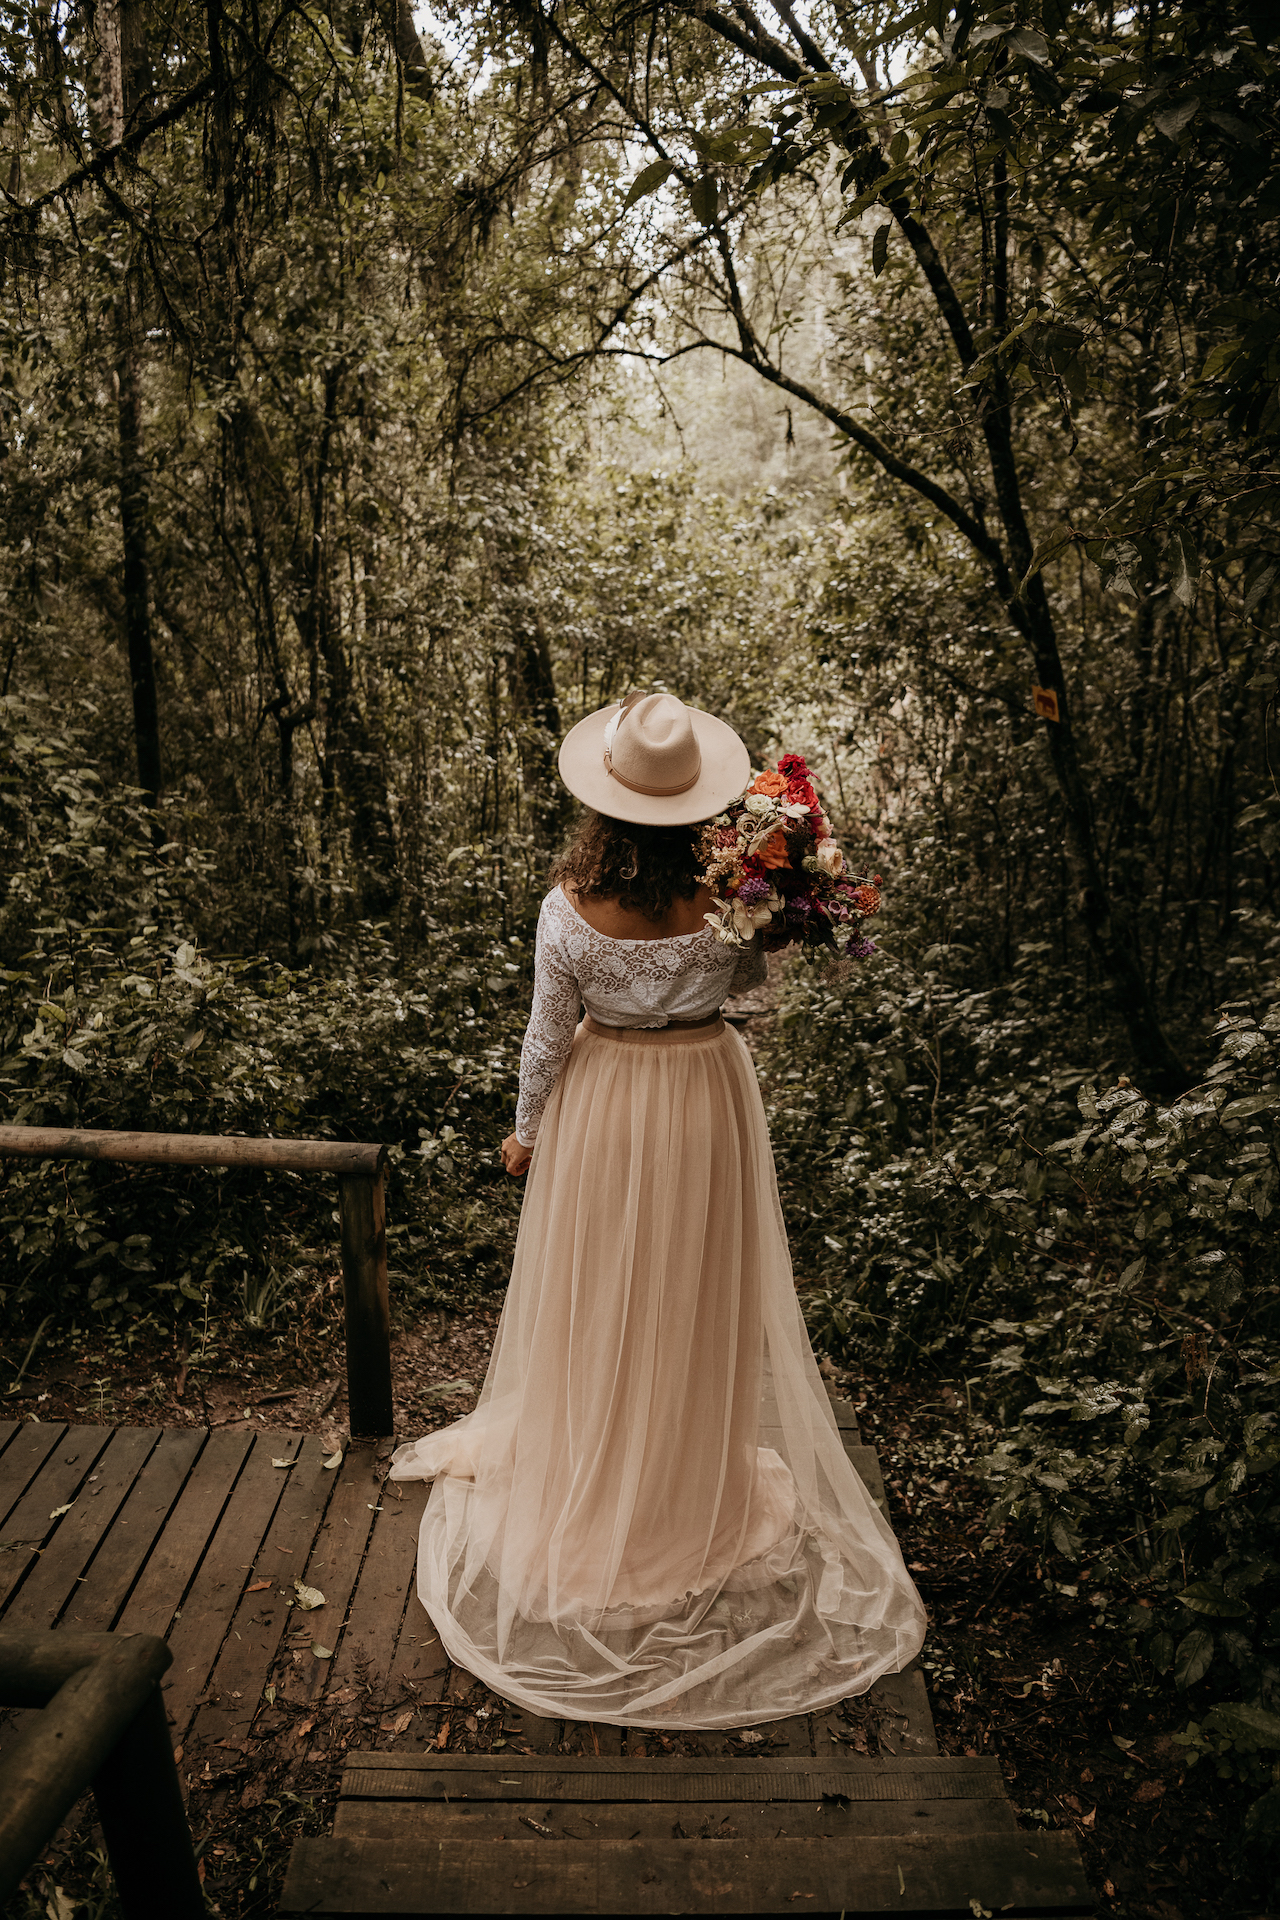 How-to-plan-a-Full-Day-Adventure-Elopement